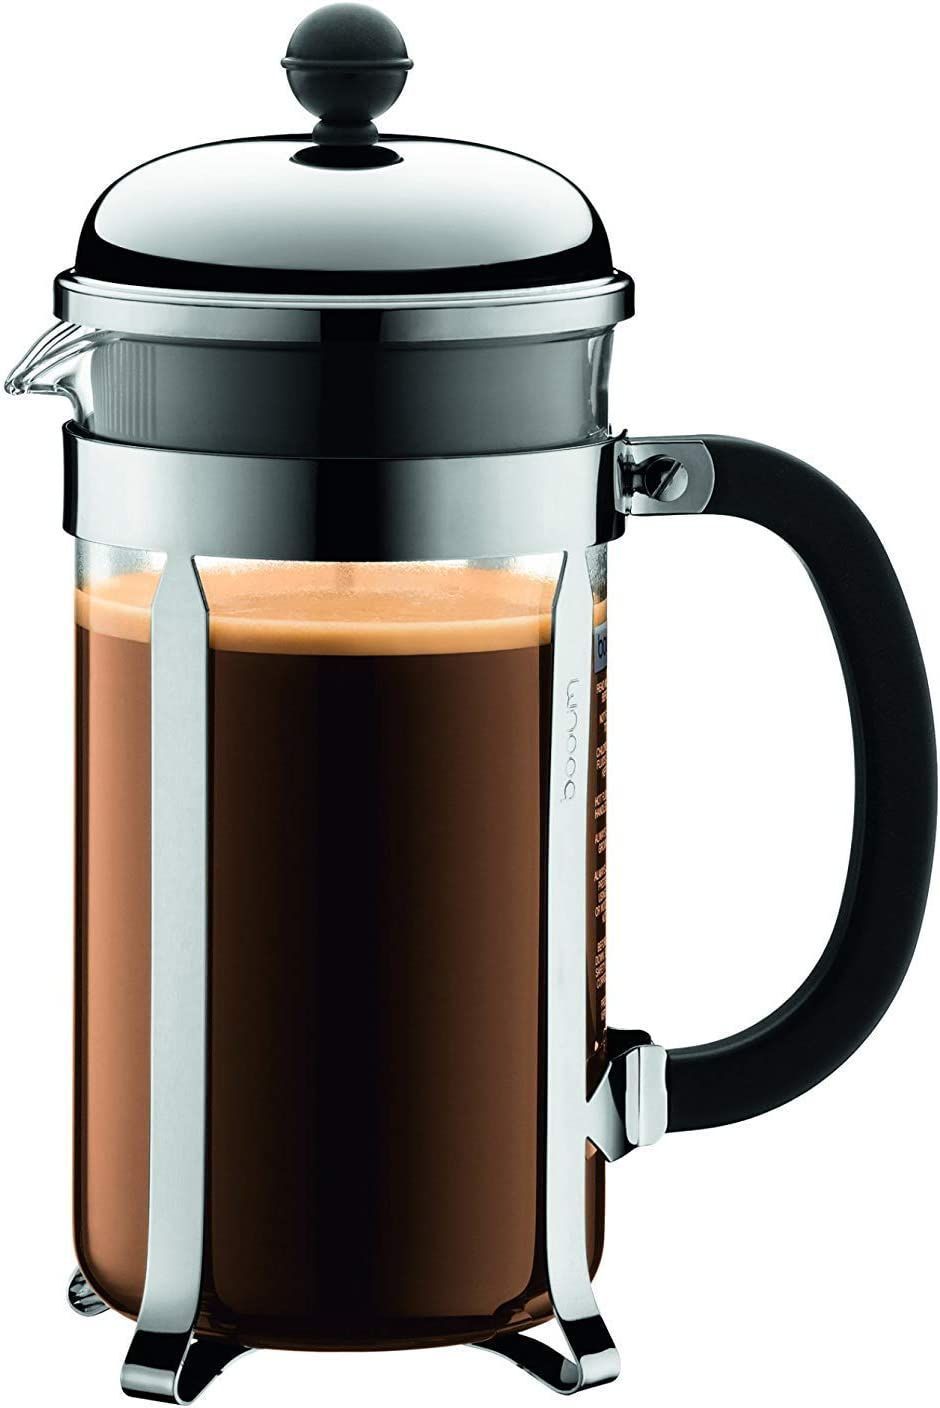 Bodum Chambord French Press Coffee Maker with stainless steel frame and black handle and knob